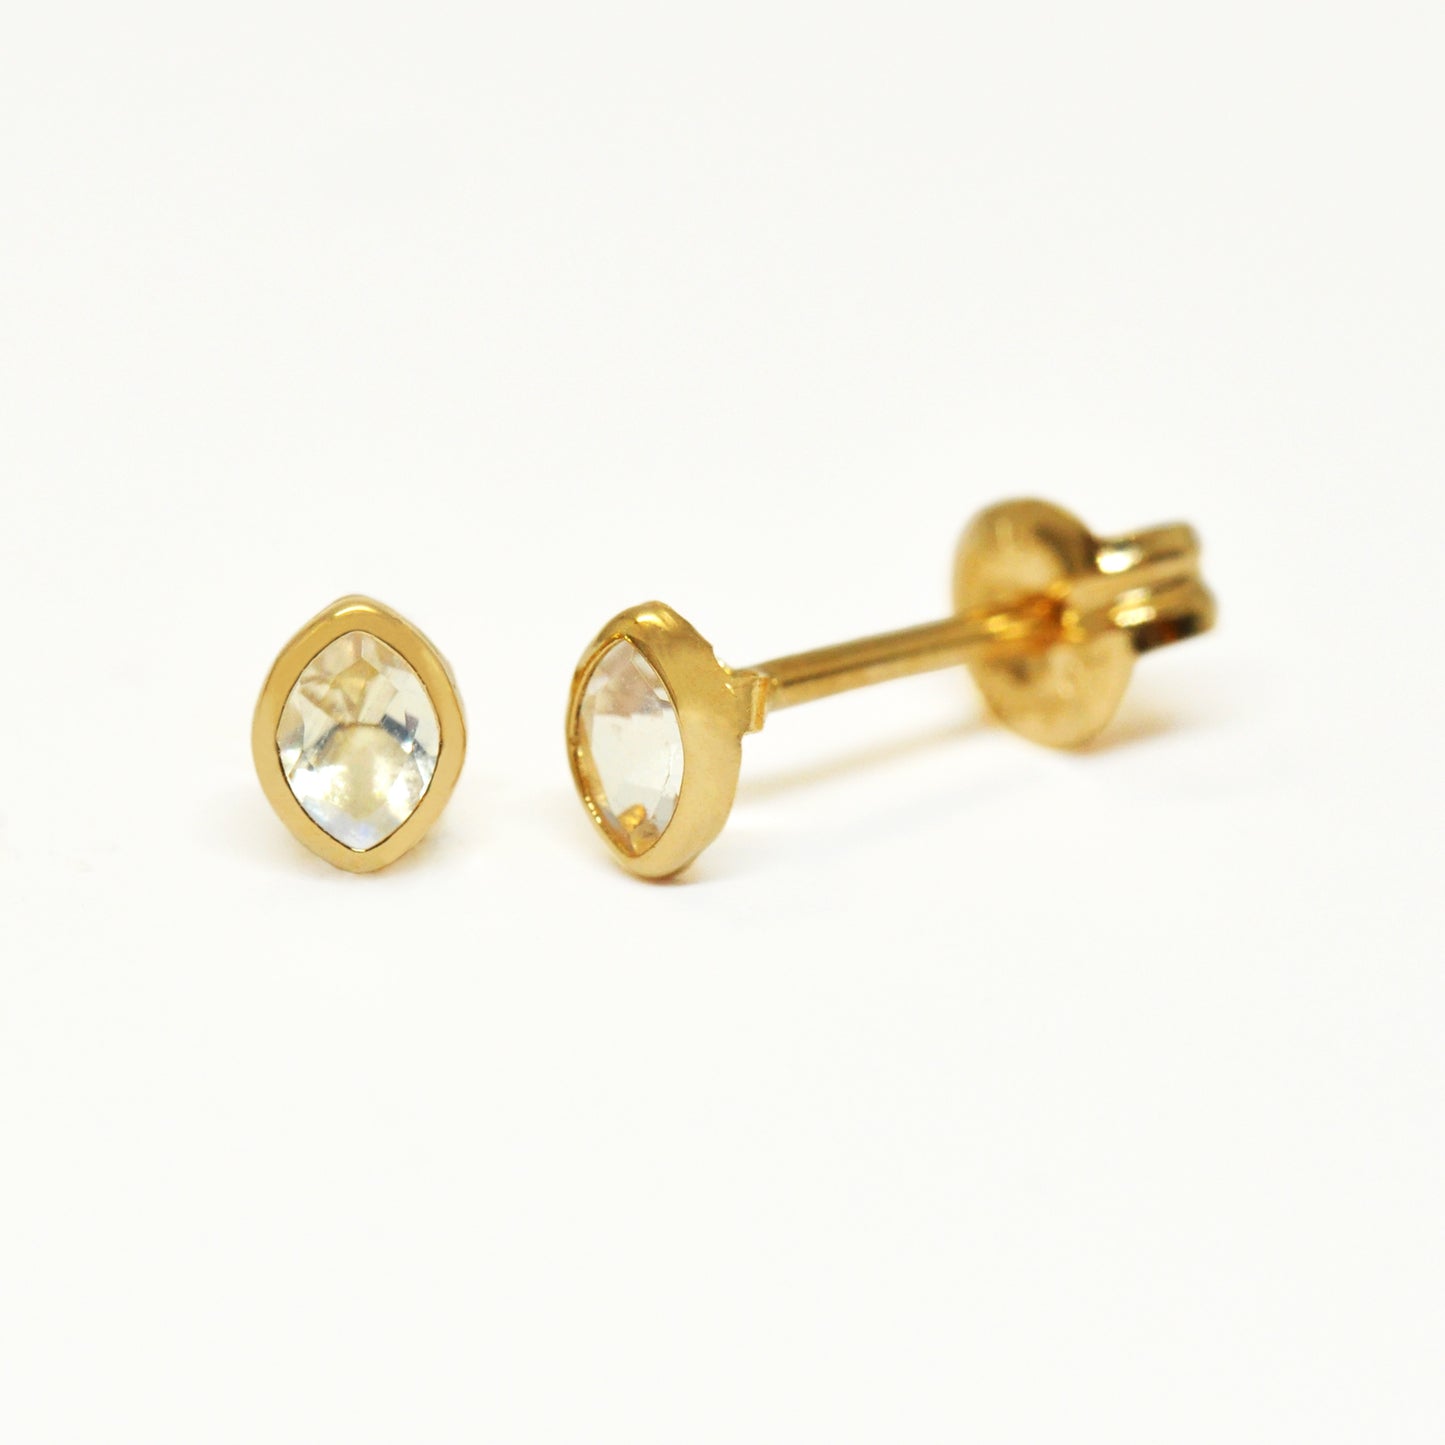 [Second Earrings] 18K Yellow Gold Blue Moonstone Earrings - Product Image